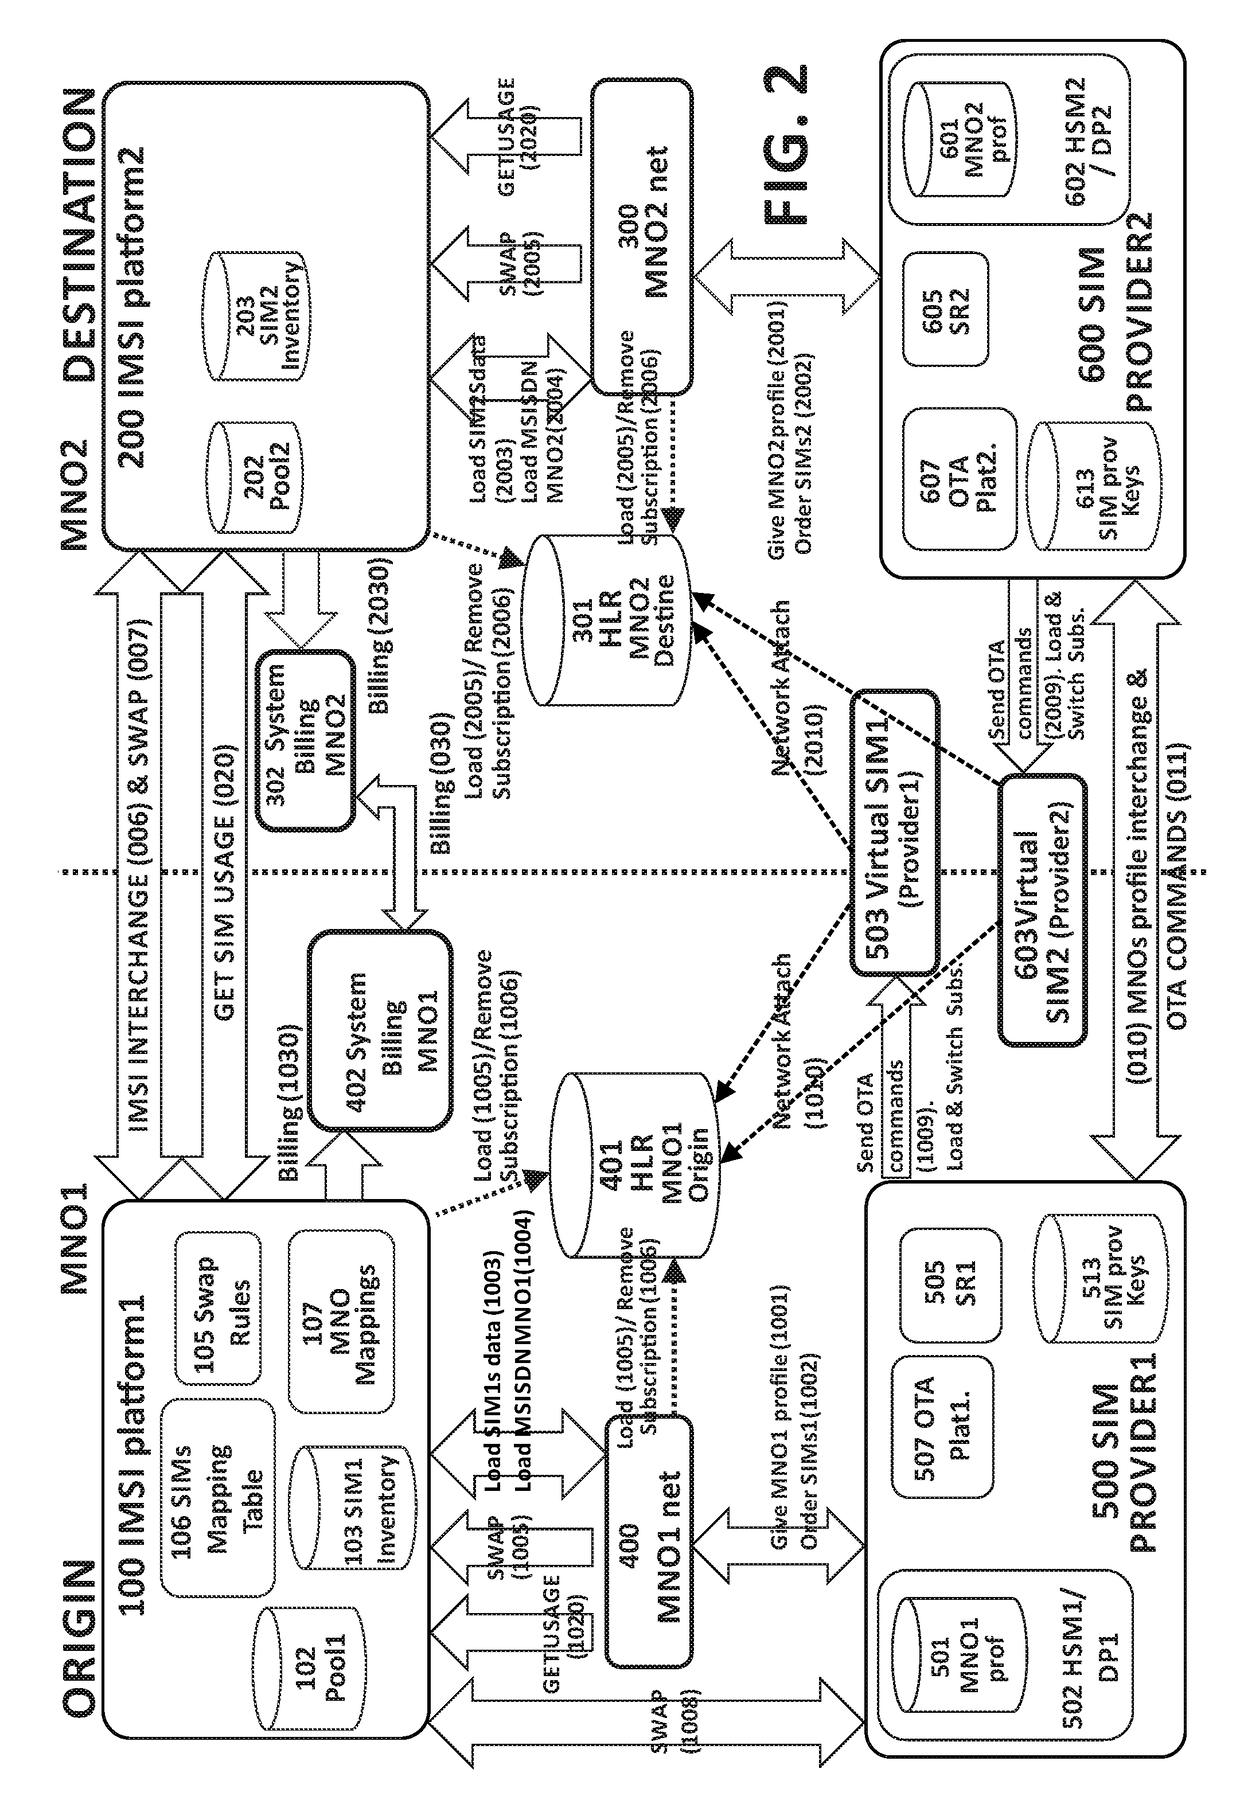 Method and system for dynamic managing of subscriber devices in mobile networks